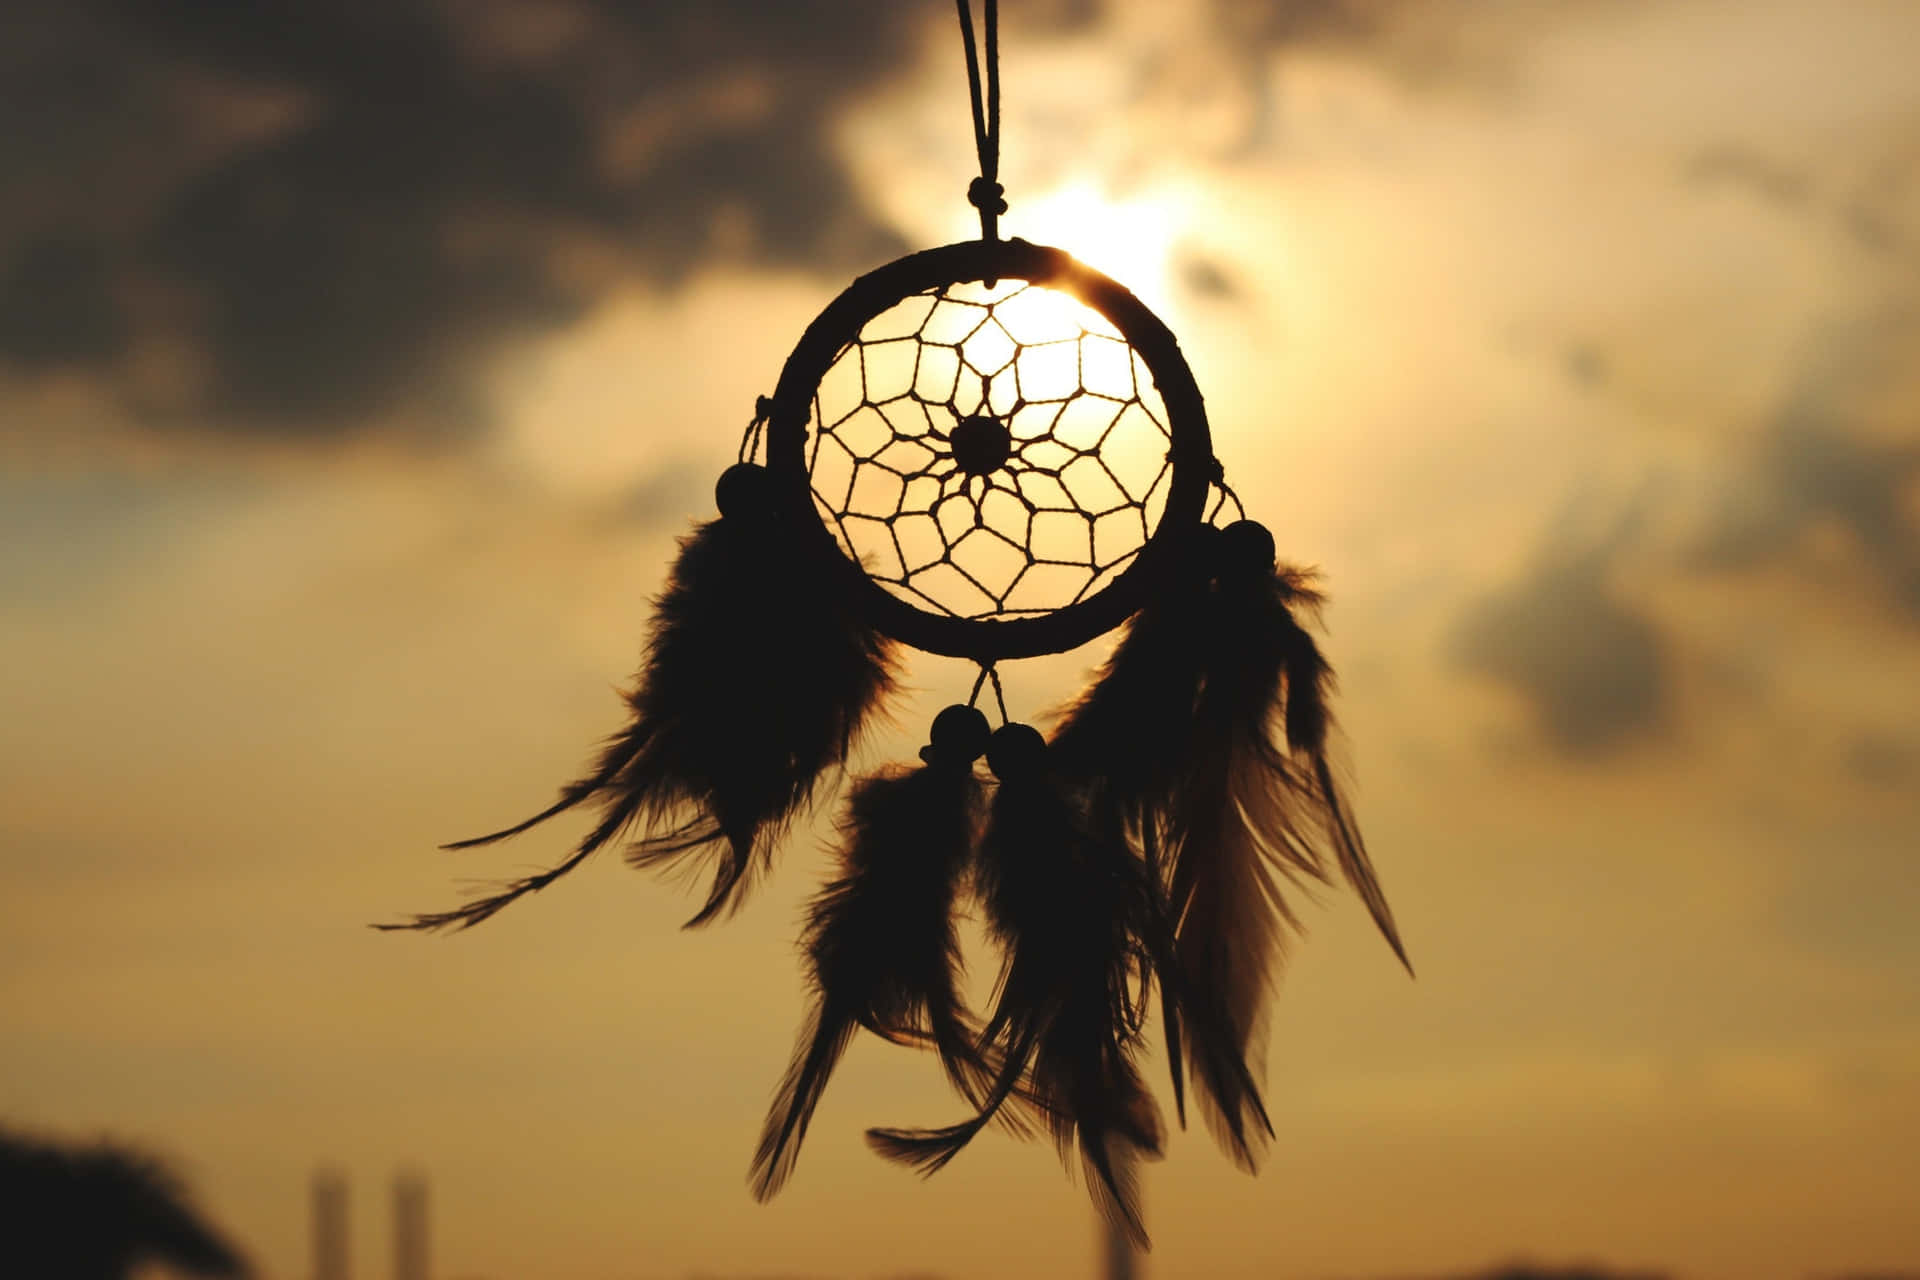 A Dream Catcher Hanging From The Sky